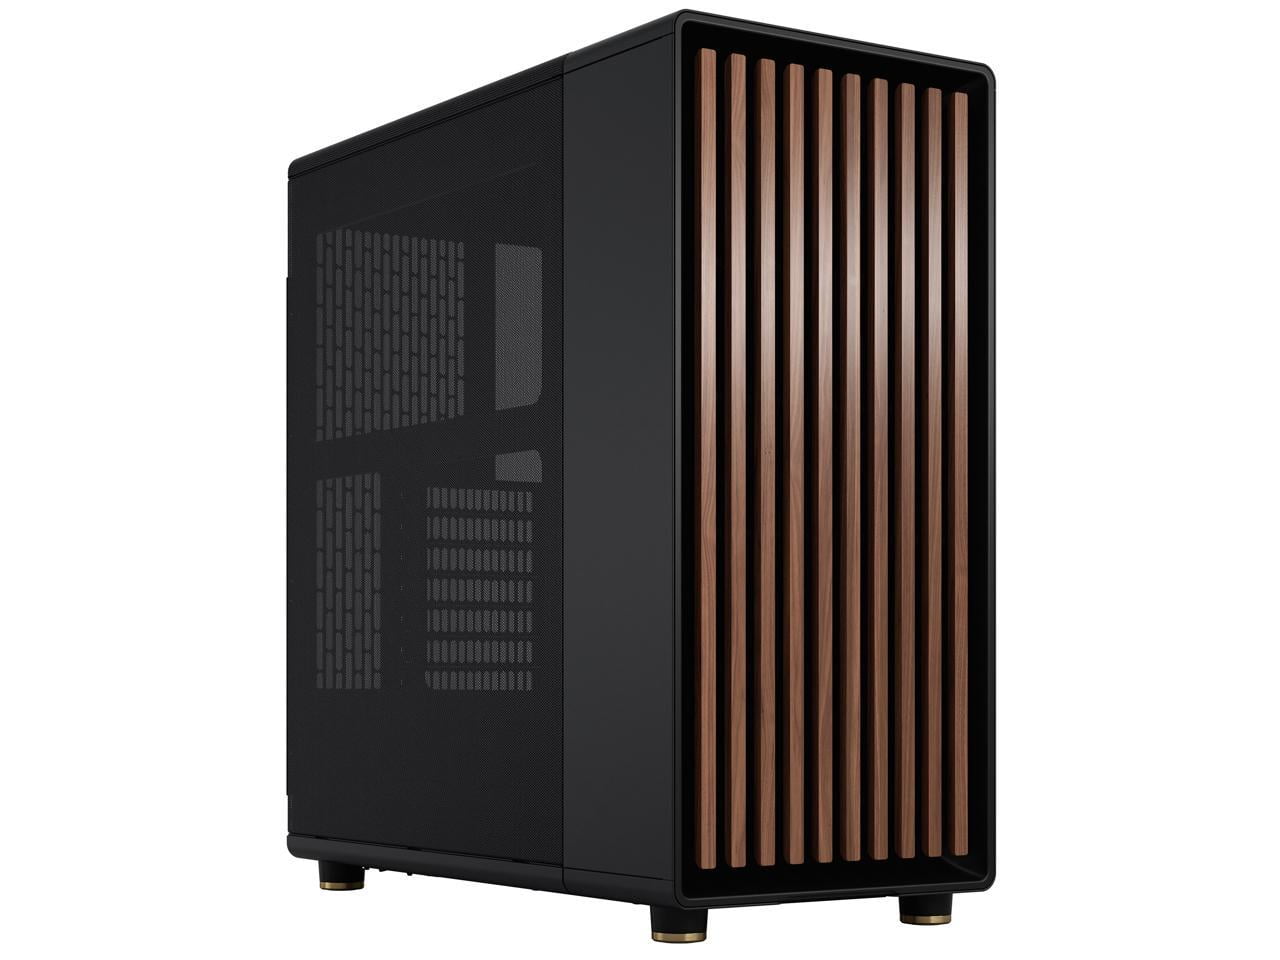 Picture of Fractal Design FD-C-NOR1C-01 North Black Walnut Mesh ATX Mid-Tower Case with Mesh Side Panel & Steel Frame - Charcoal Black